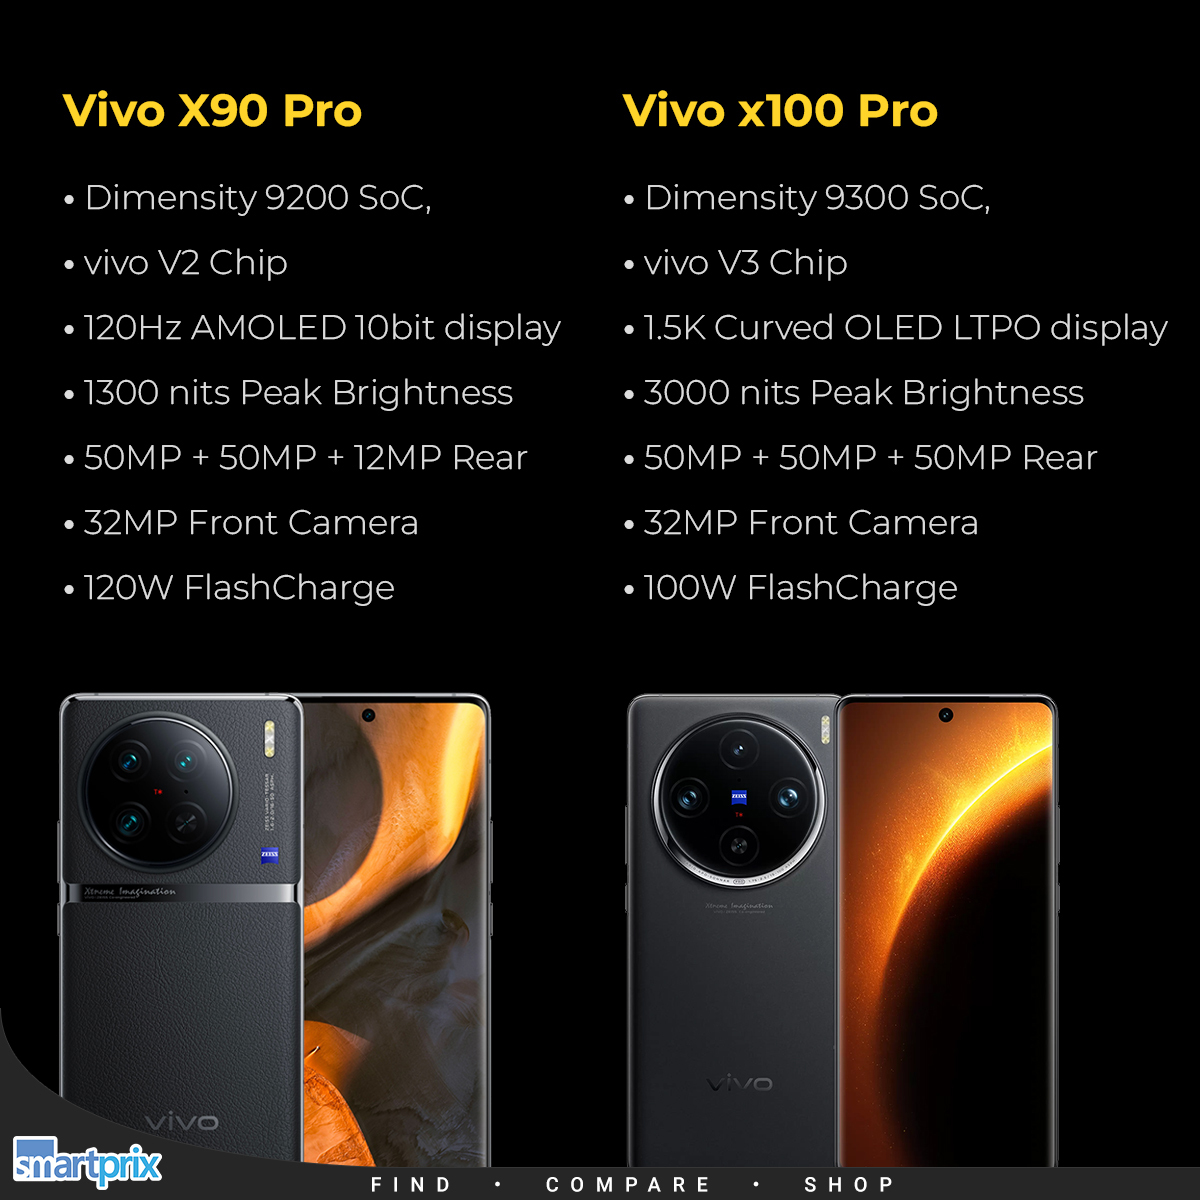 Vivo X90 Pro Review with Pros and Cons - Smartprix